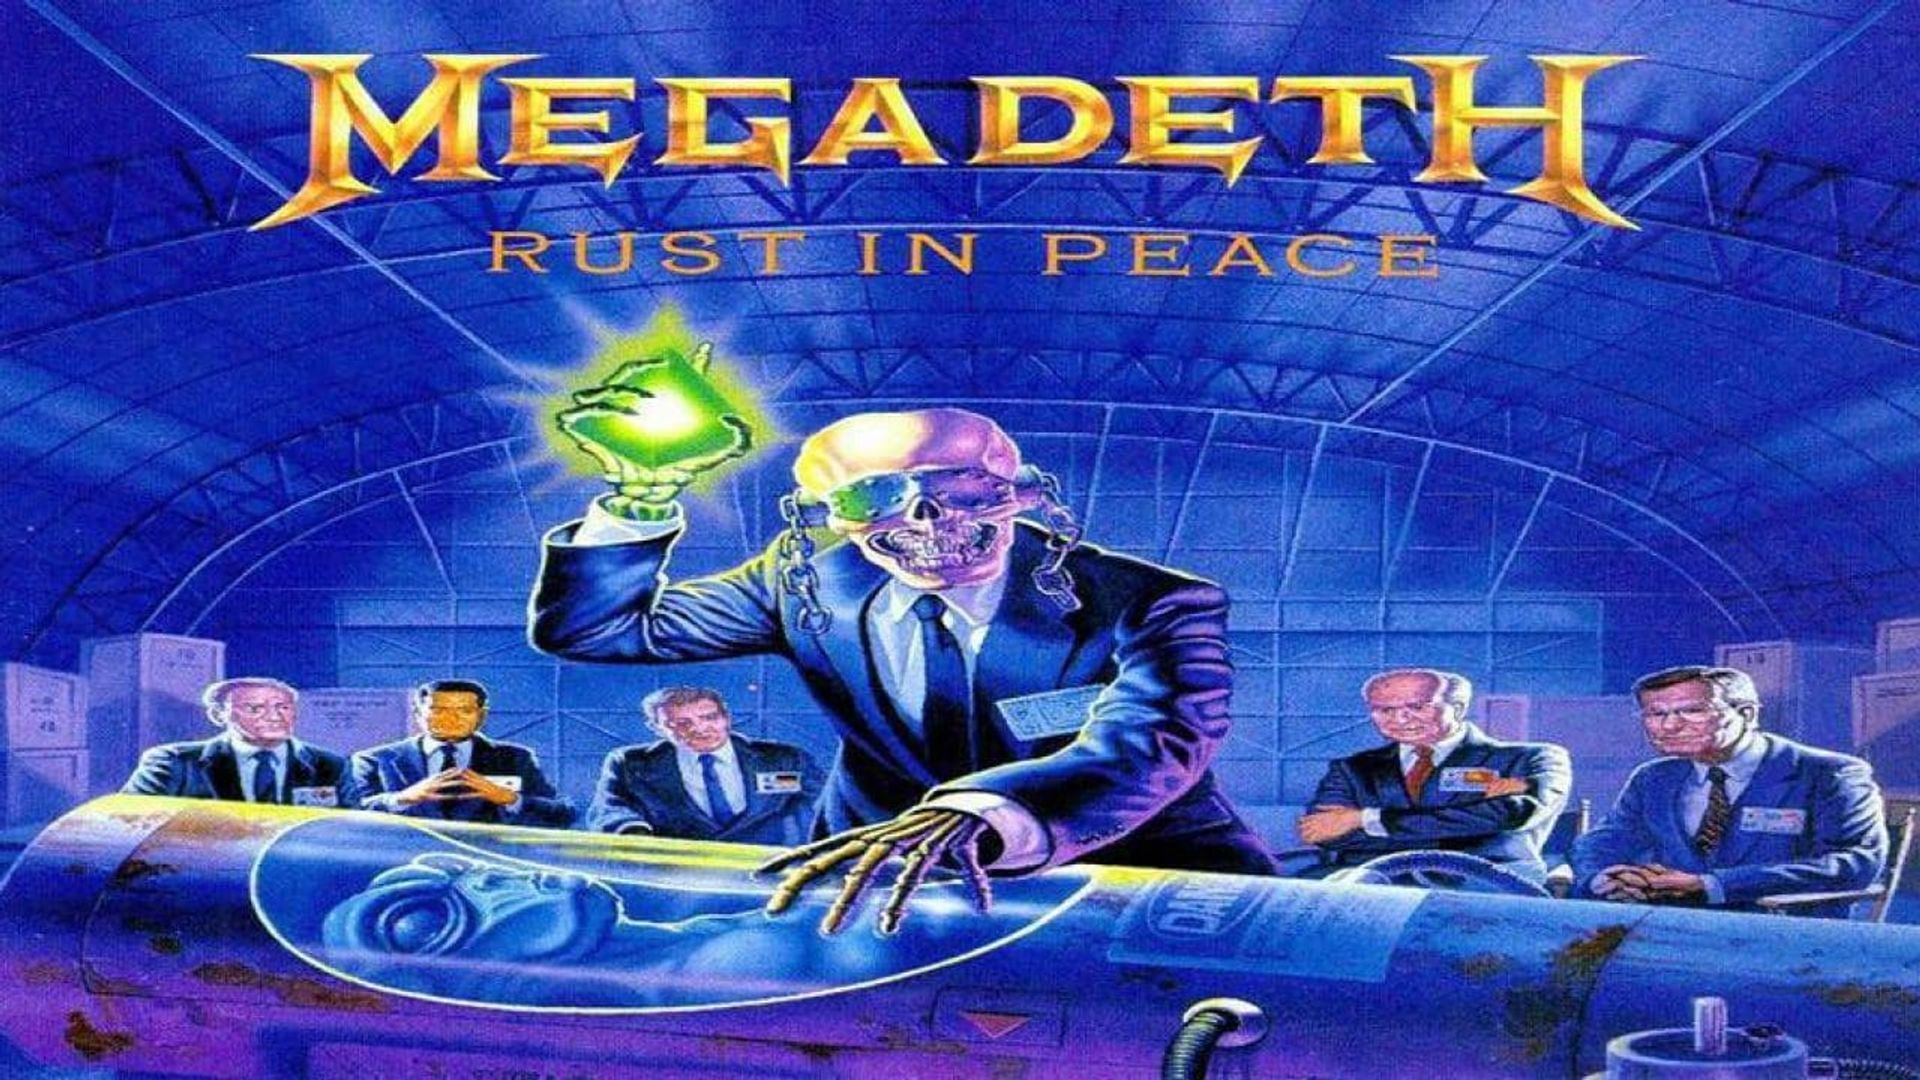 Megadeth: Rust in Peace Live background